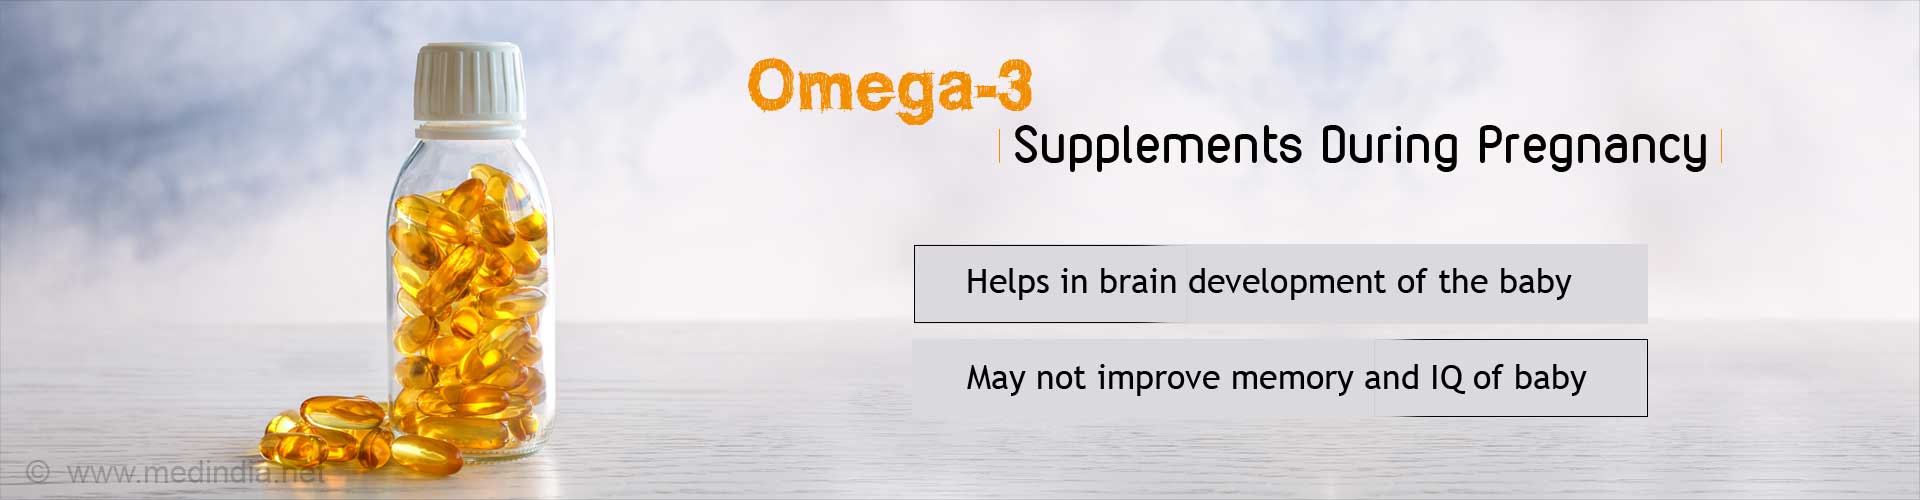 Omega-3 Supplements During Pregnancy
- Helps in brain development of the baby
- May not improve memory and IQ of the baby